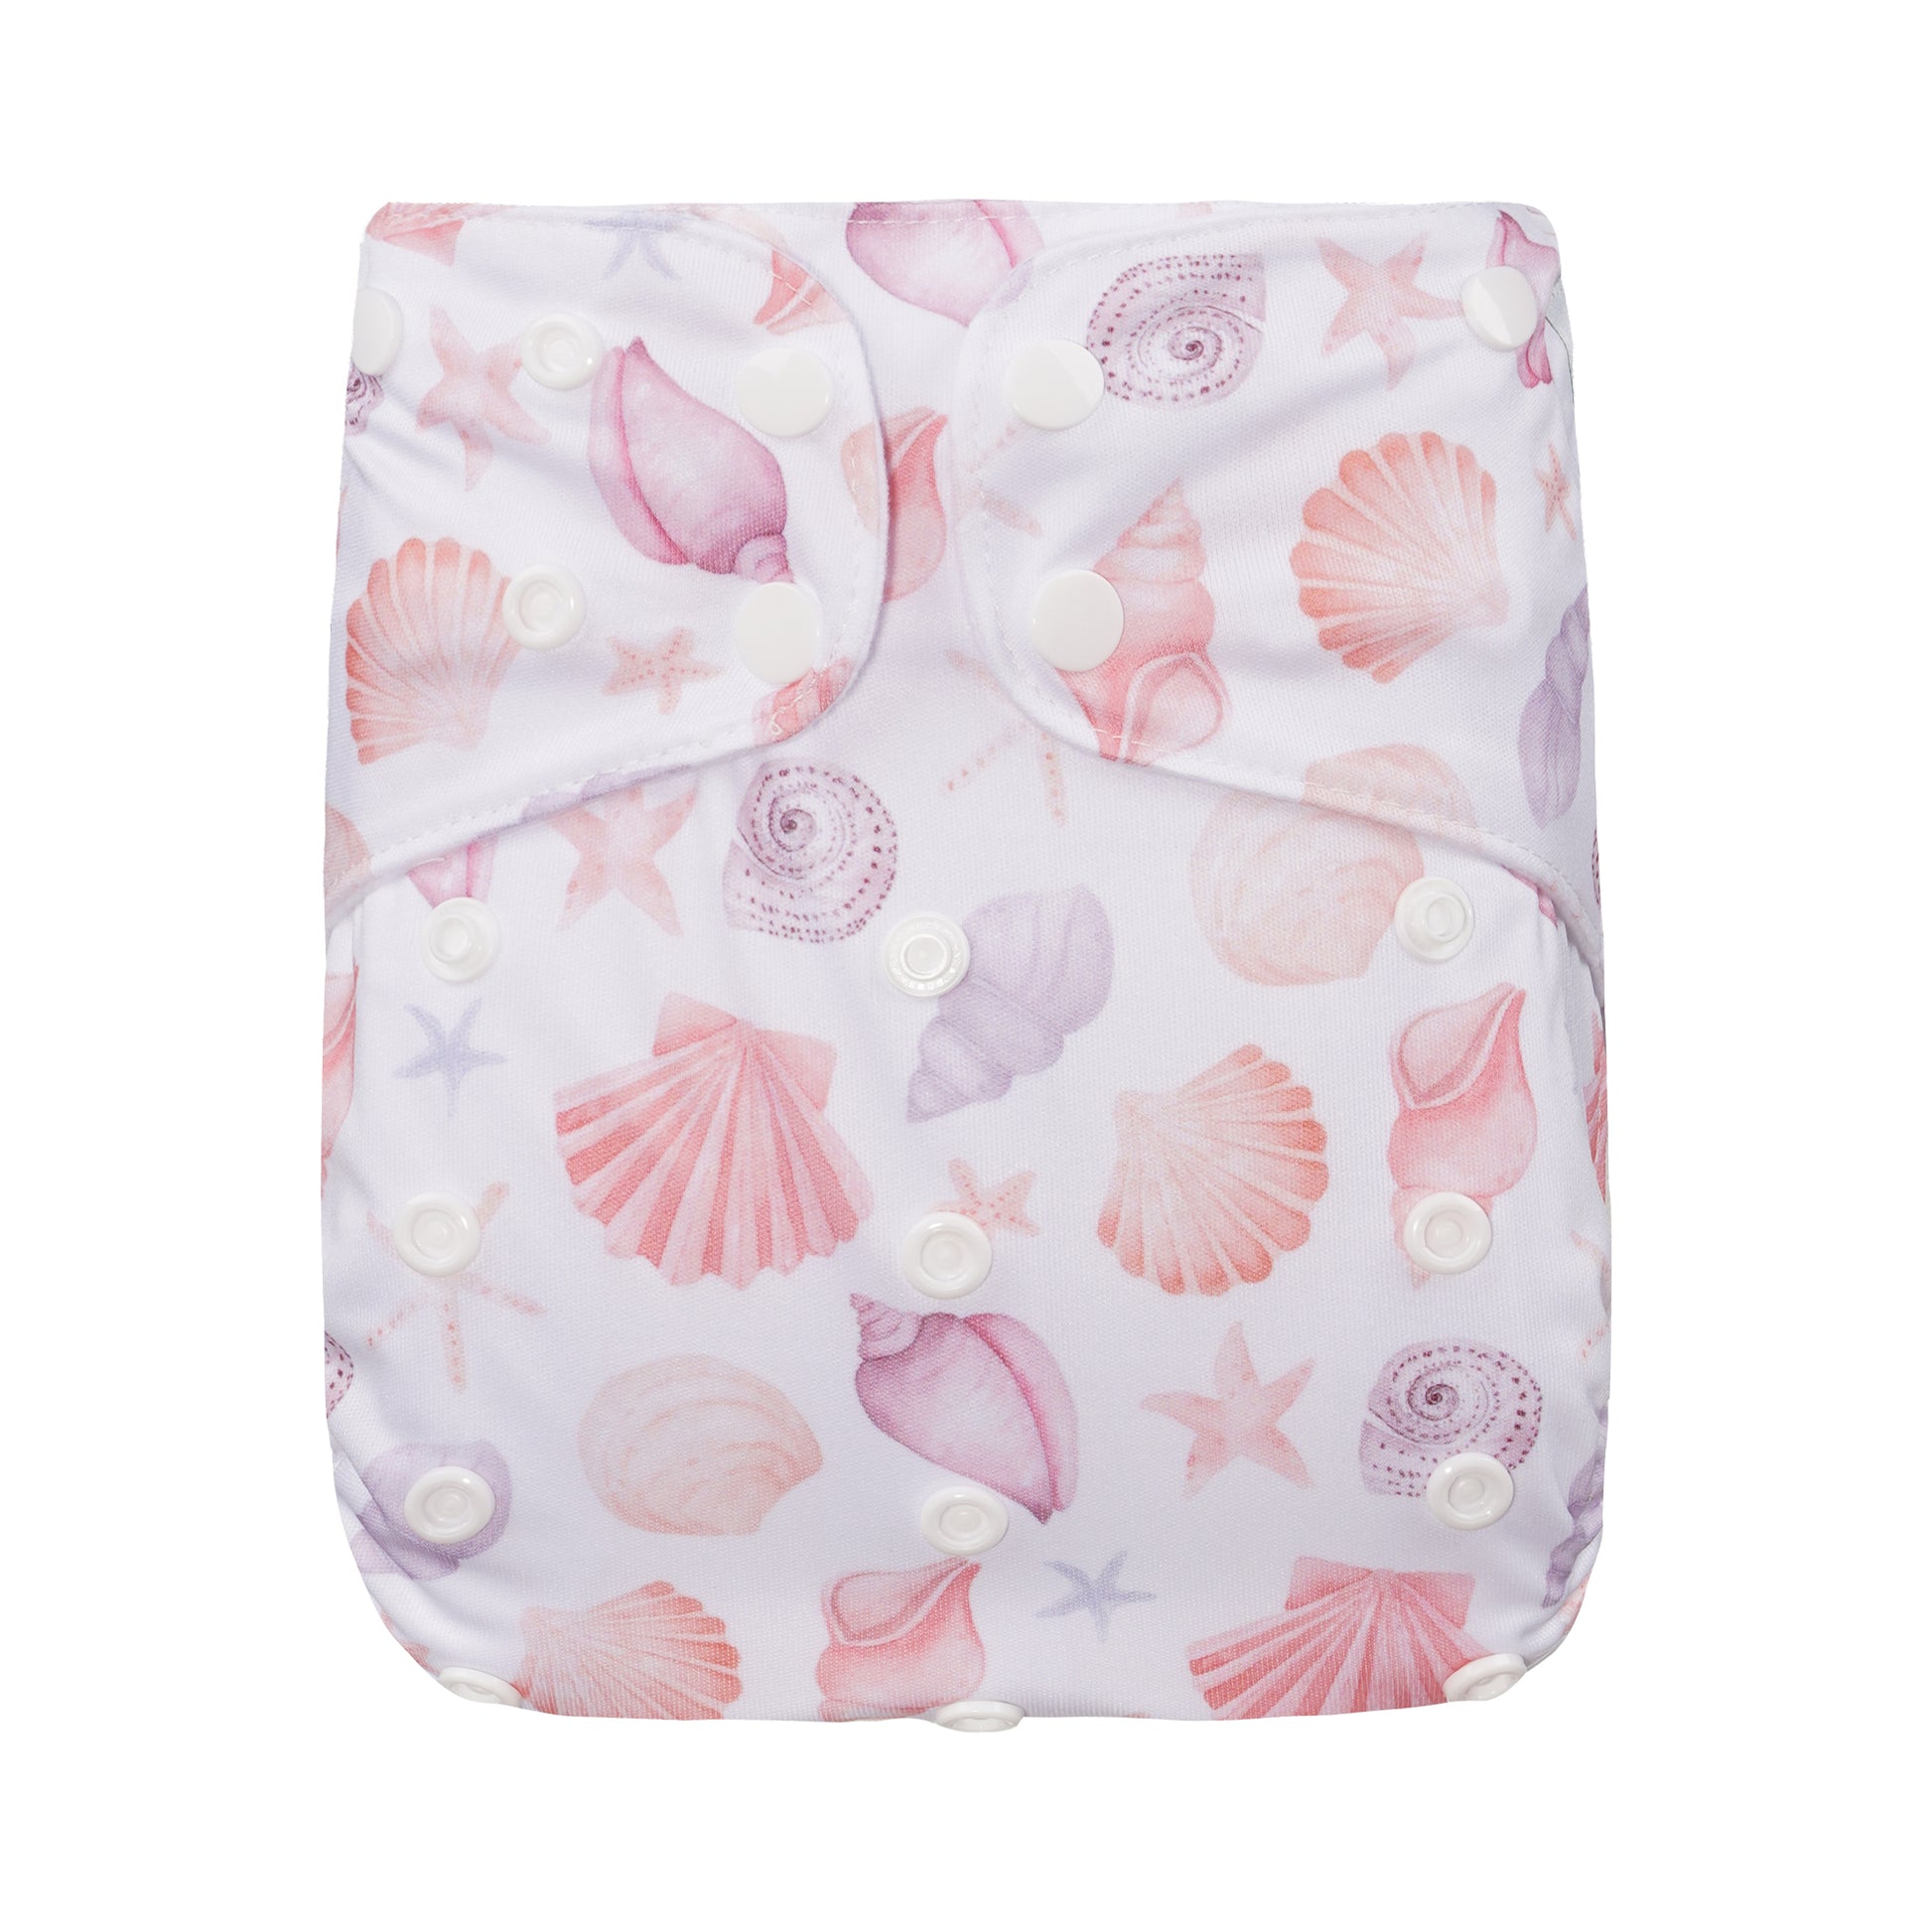 Bear & Moo Reusable Cloth Nappy in Sunset Seashells print | Luxe